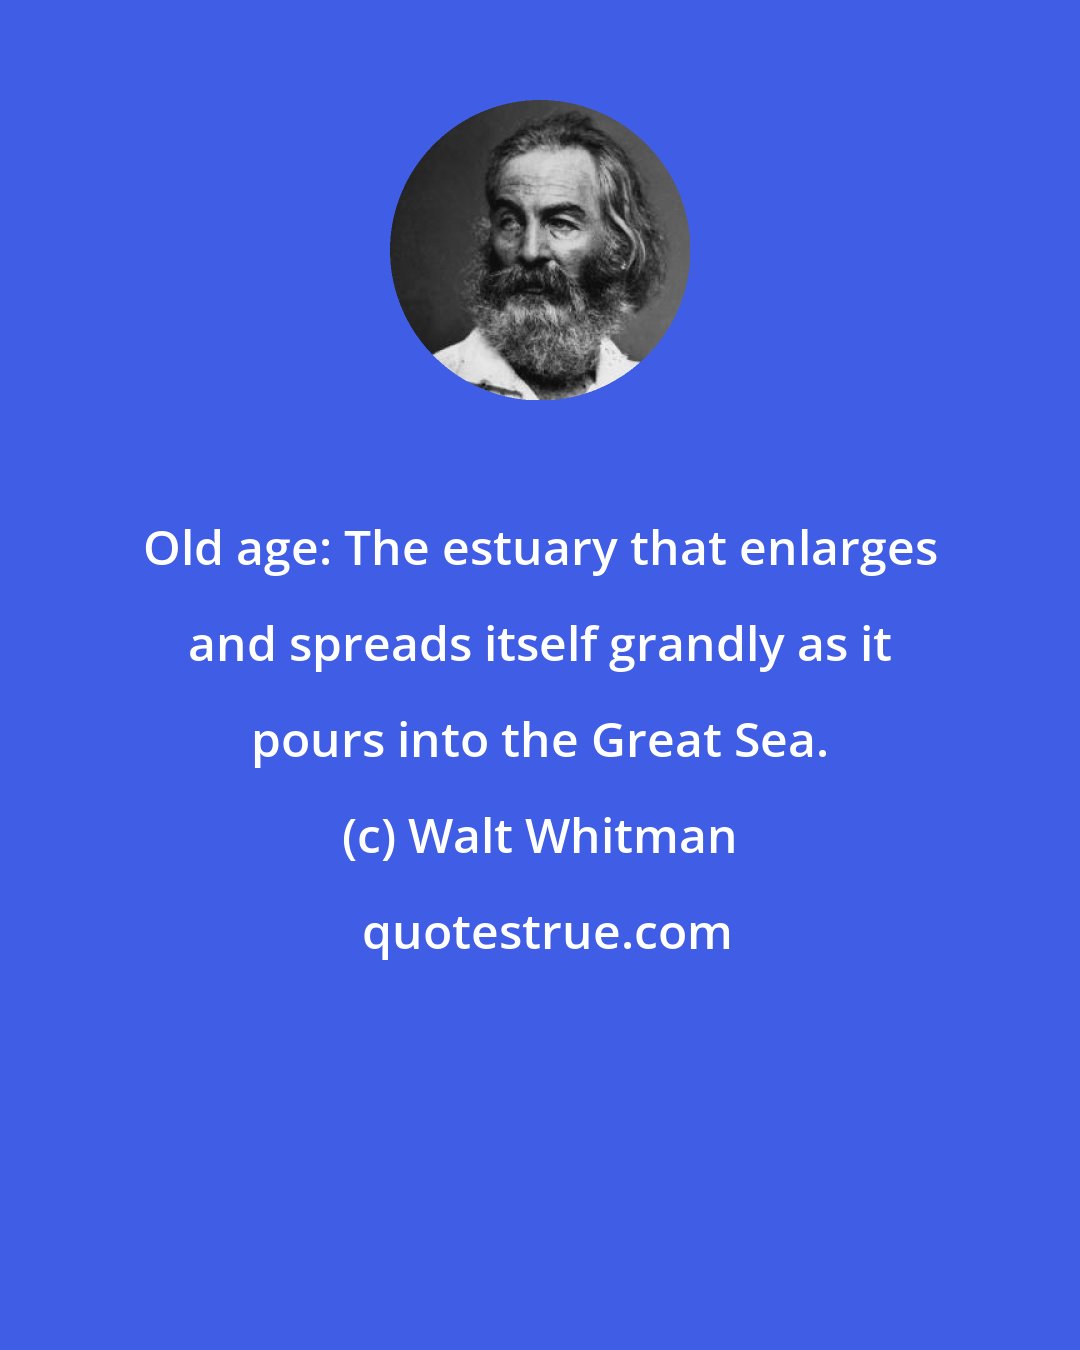 Walt Whitman: Old age: The estuary that enlarges and spreads itself grandly as it pours into the Great Sea.